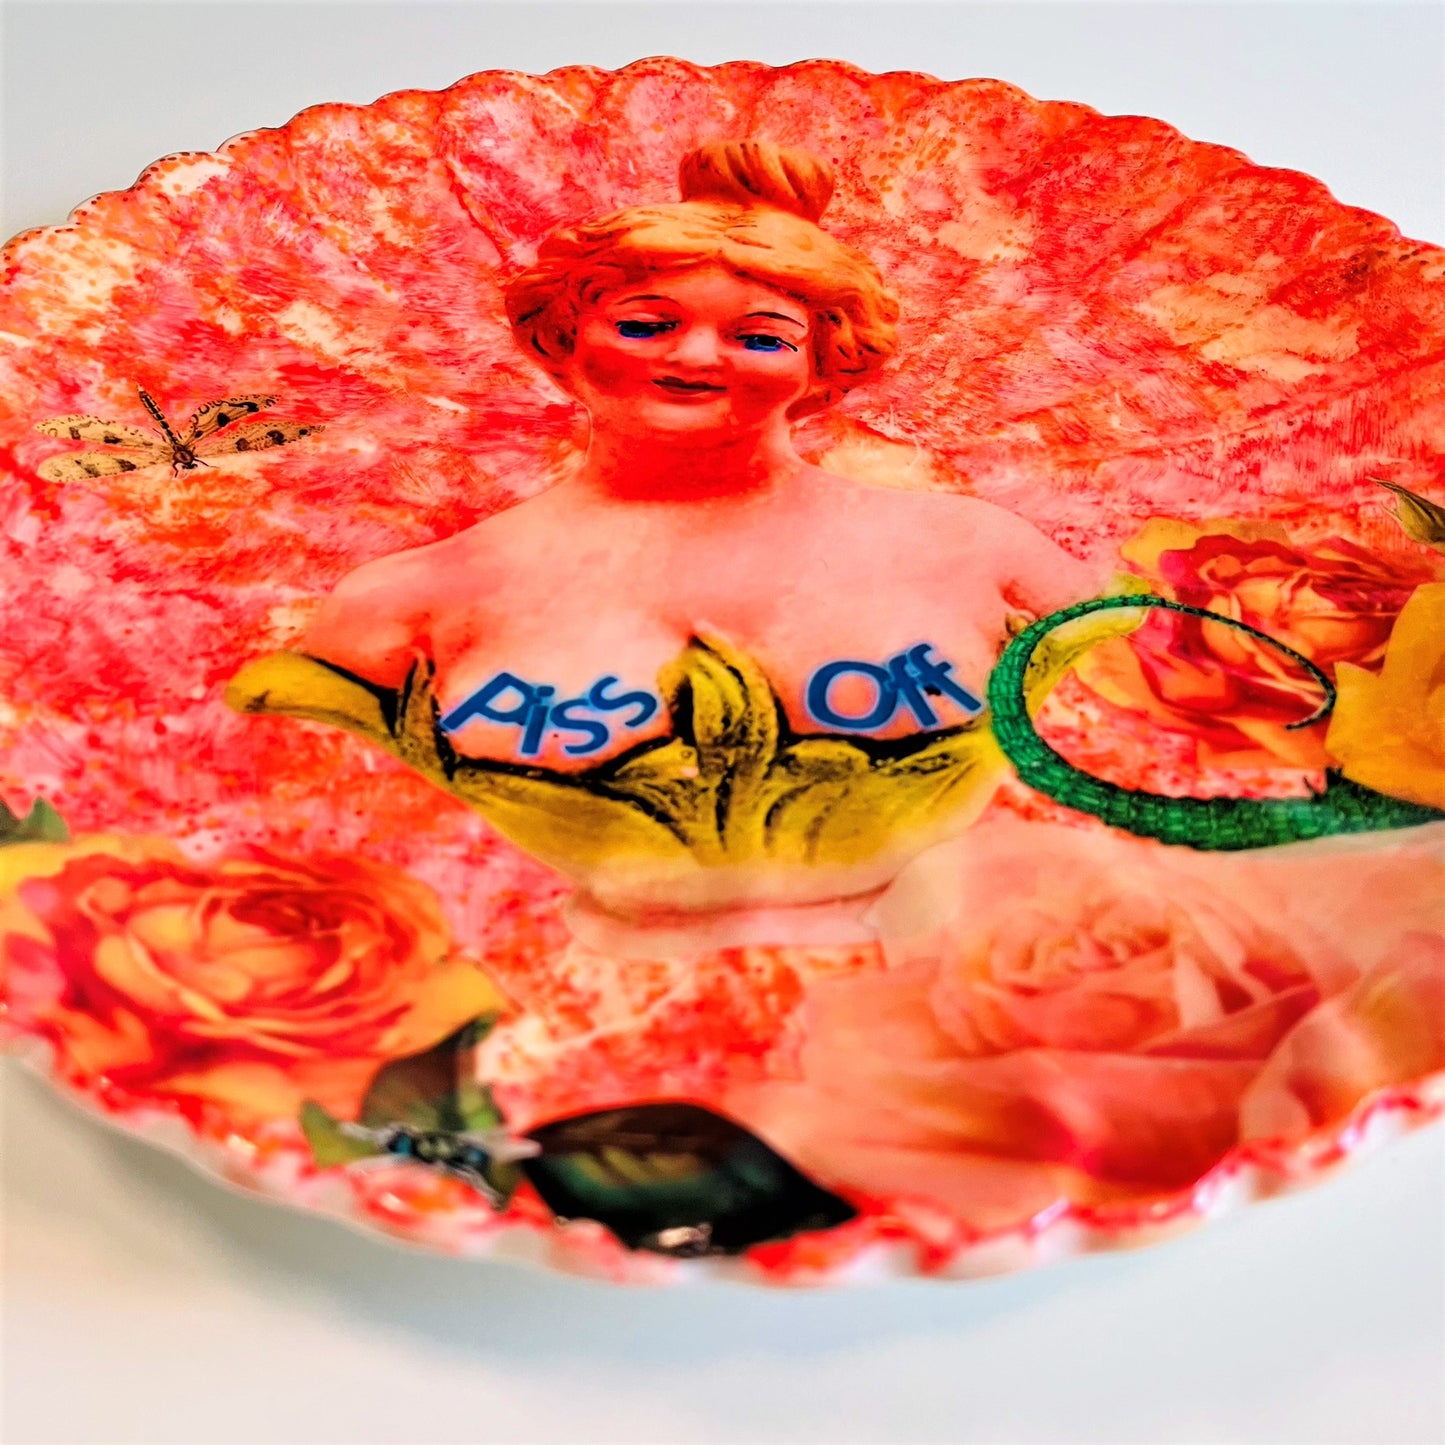 Coral Upcycled Wall Plate - "Piss Off" - by House of Frisson